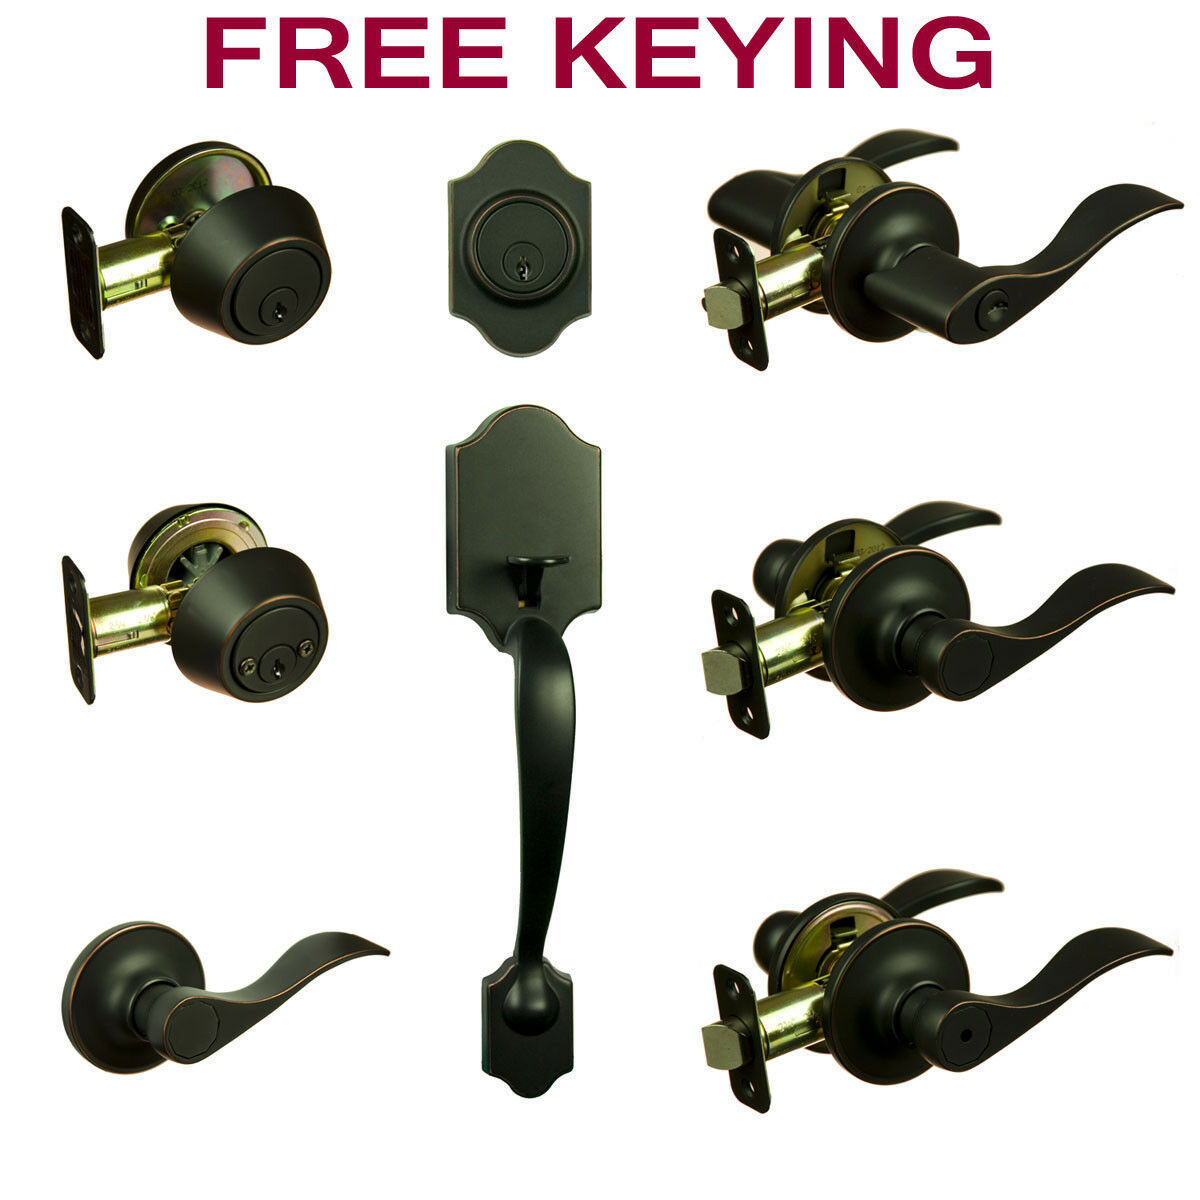 Madison Oil Rubbed Bronze Door Lever Knob Hardware Collection